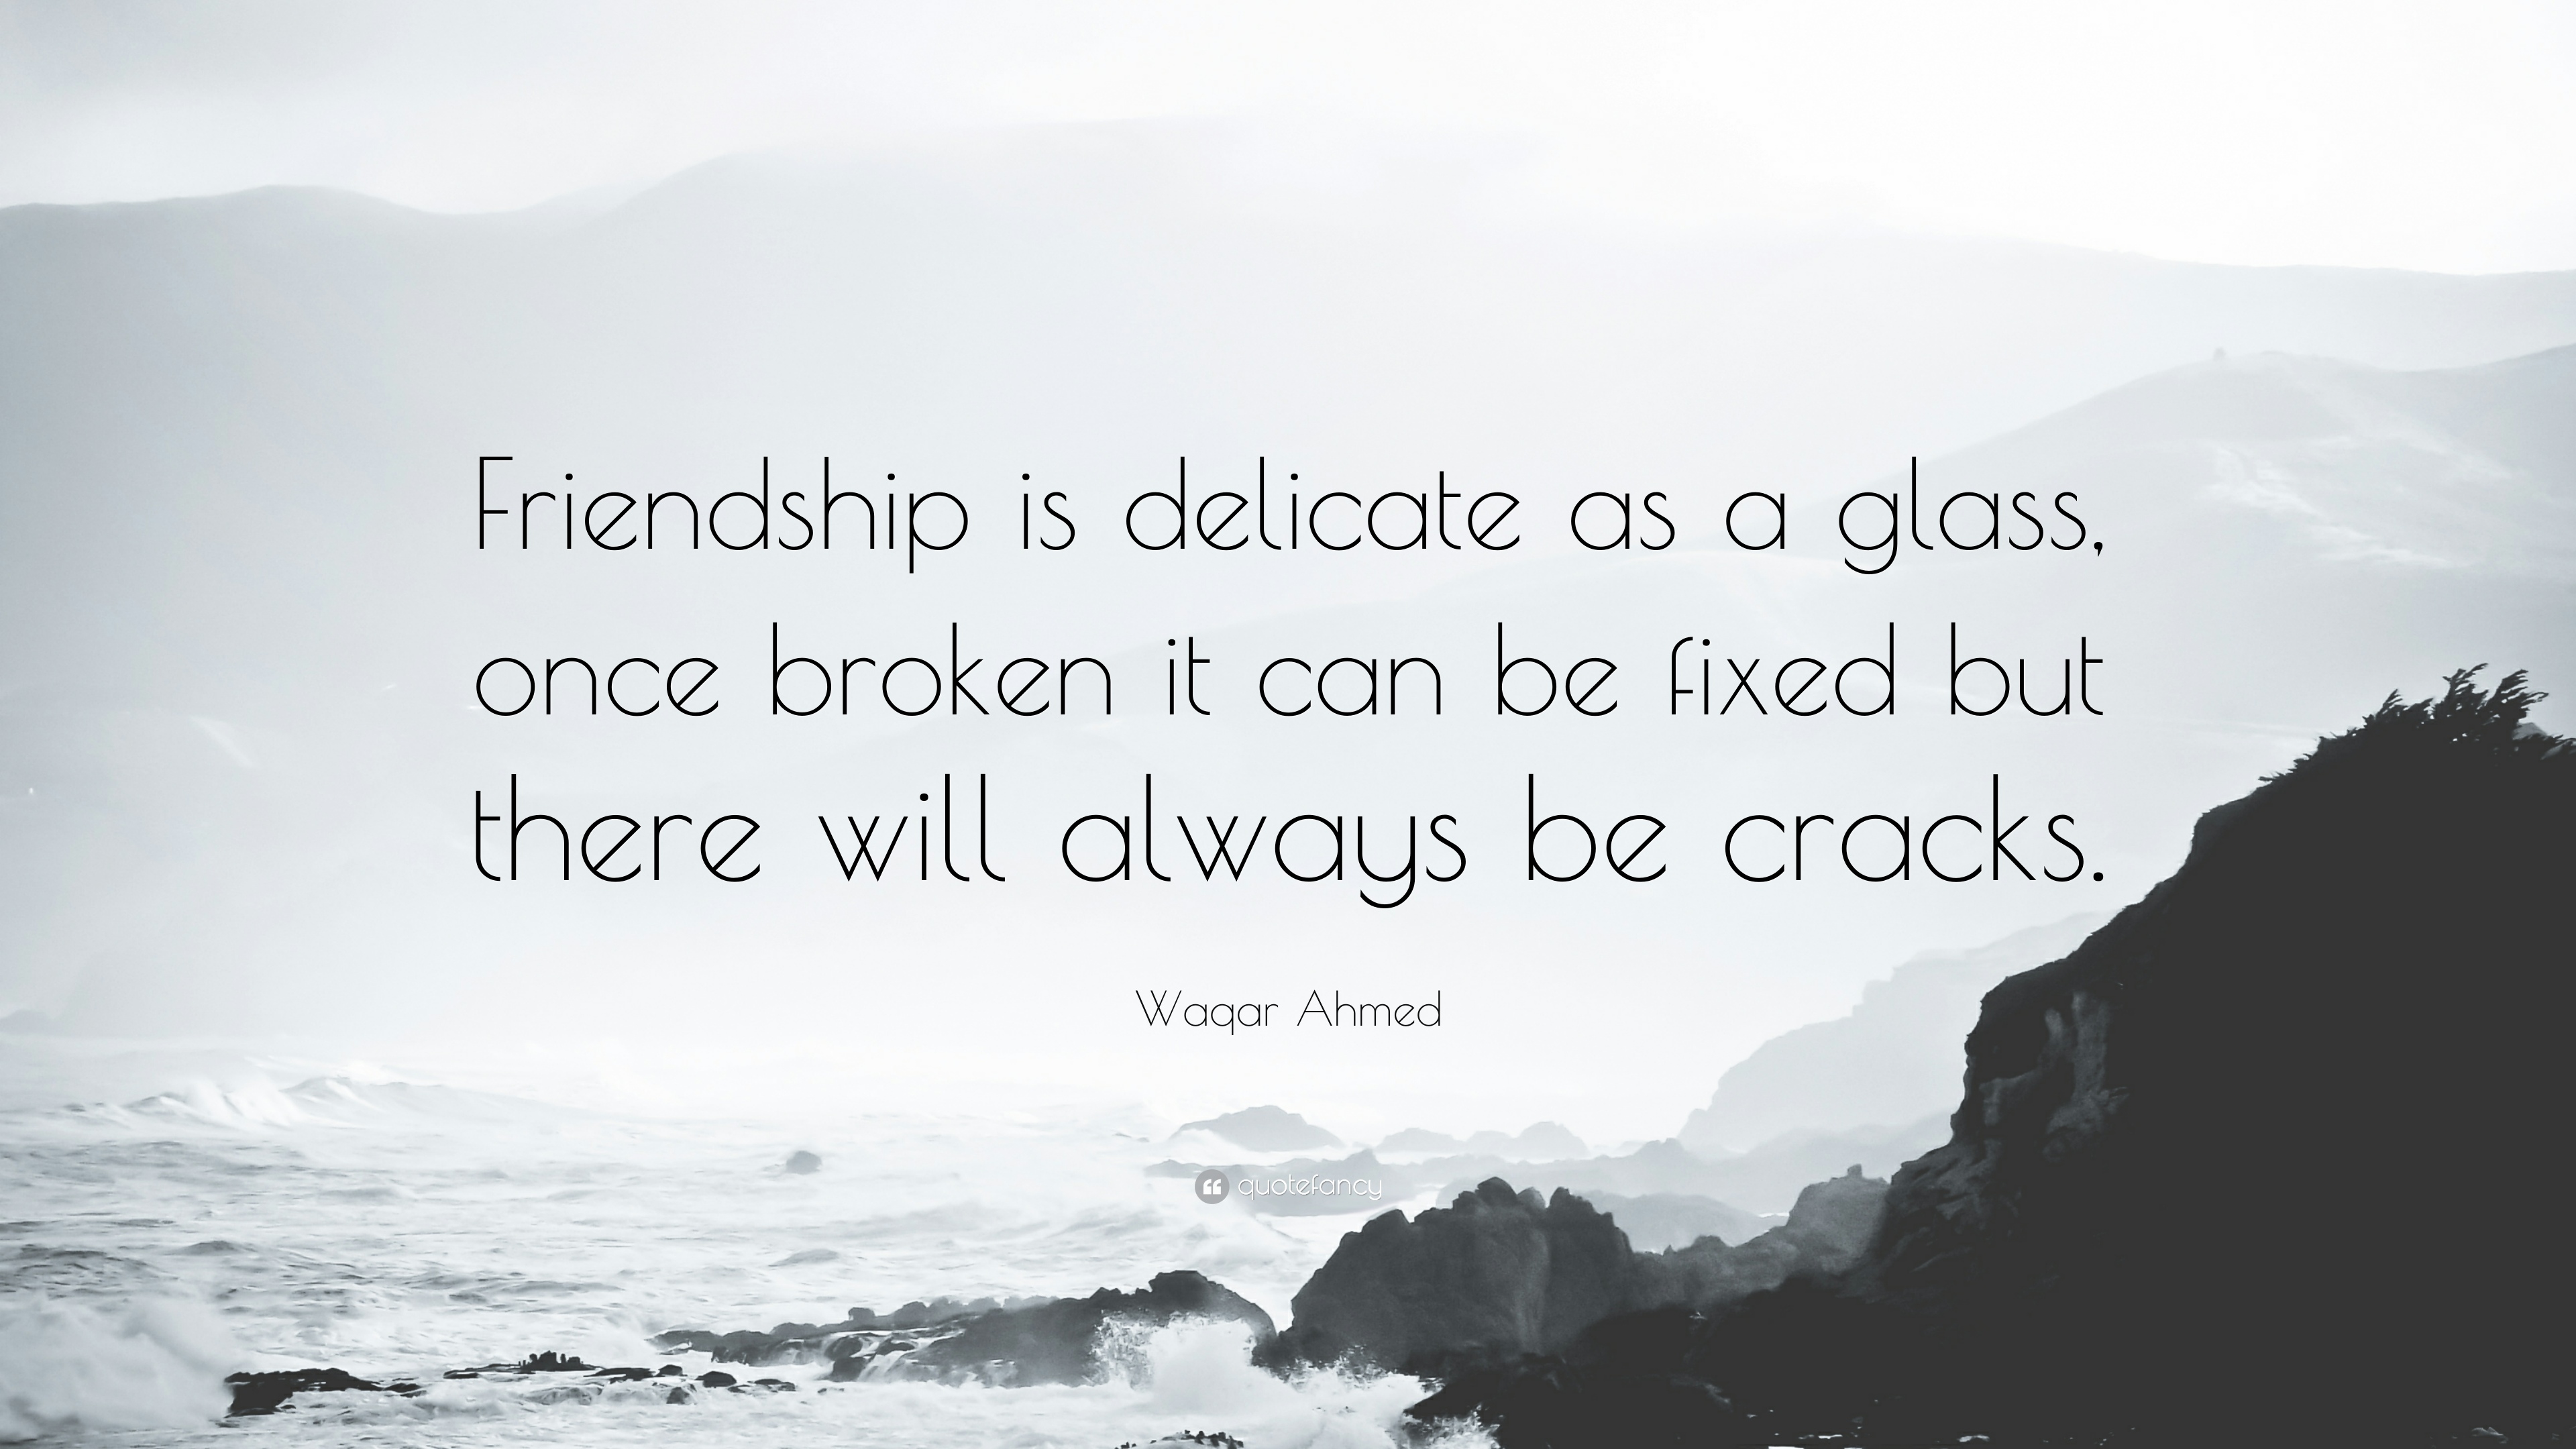 Waqar Ahmed Quote: “Friendship is delicate as a glass, once broken it can be fixed but